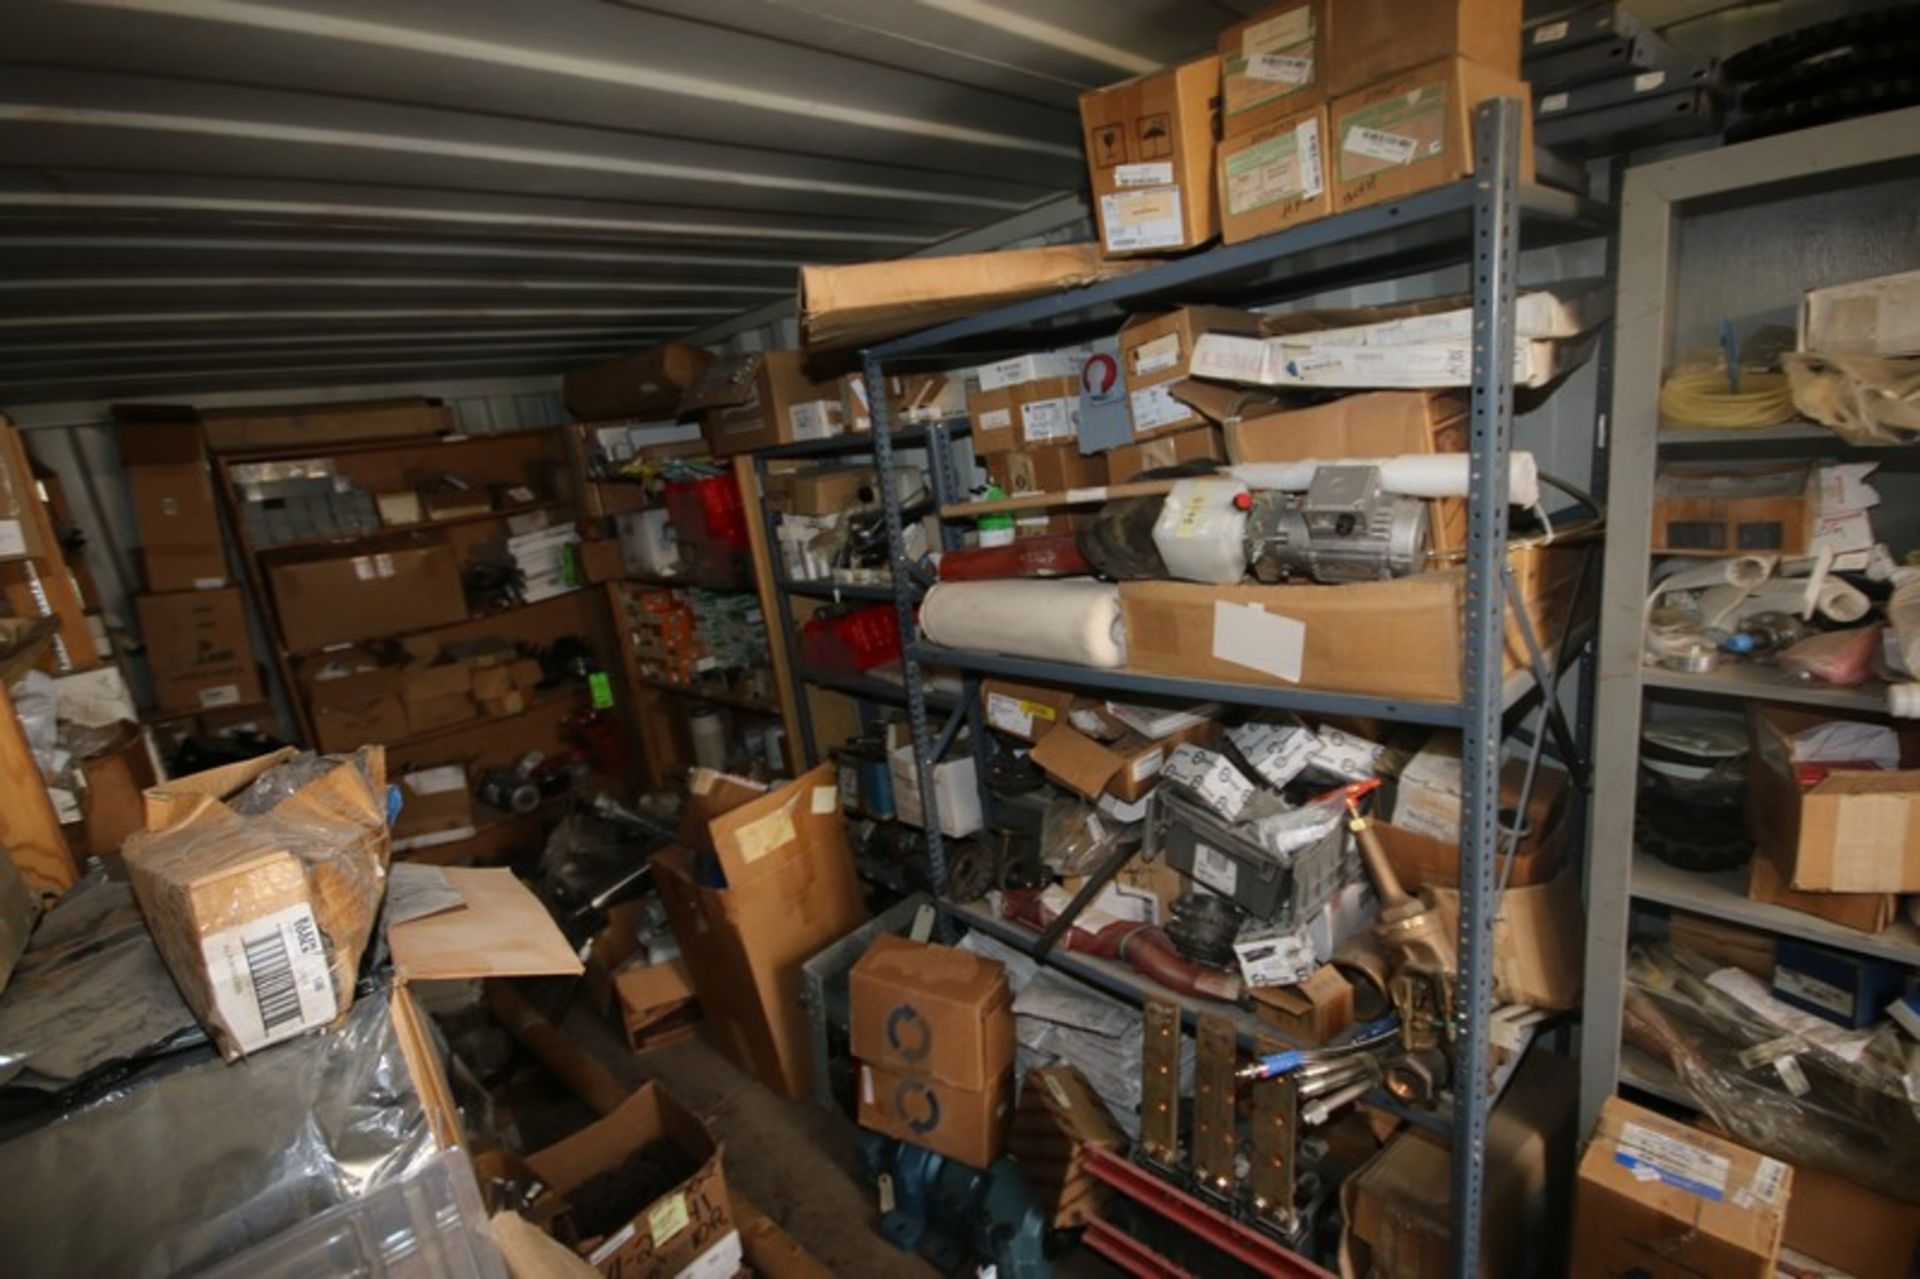 Assorted Spare Parts on 4-Shelving Units, Includes Sprockets, Gauges, Valves, Bearings, Motors,